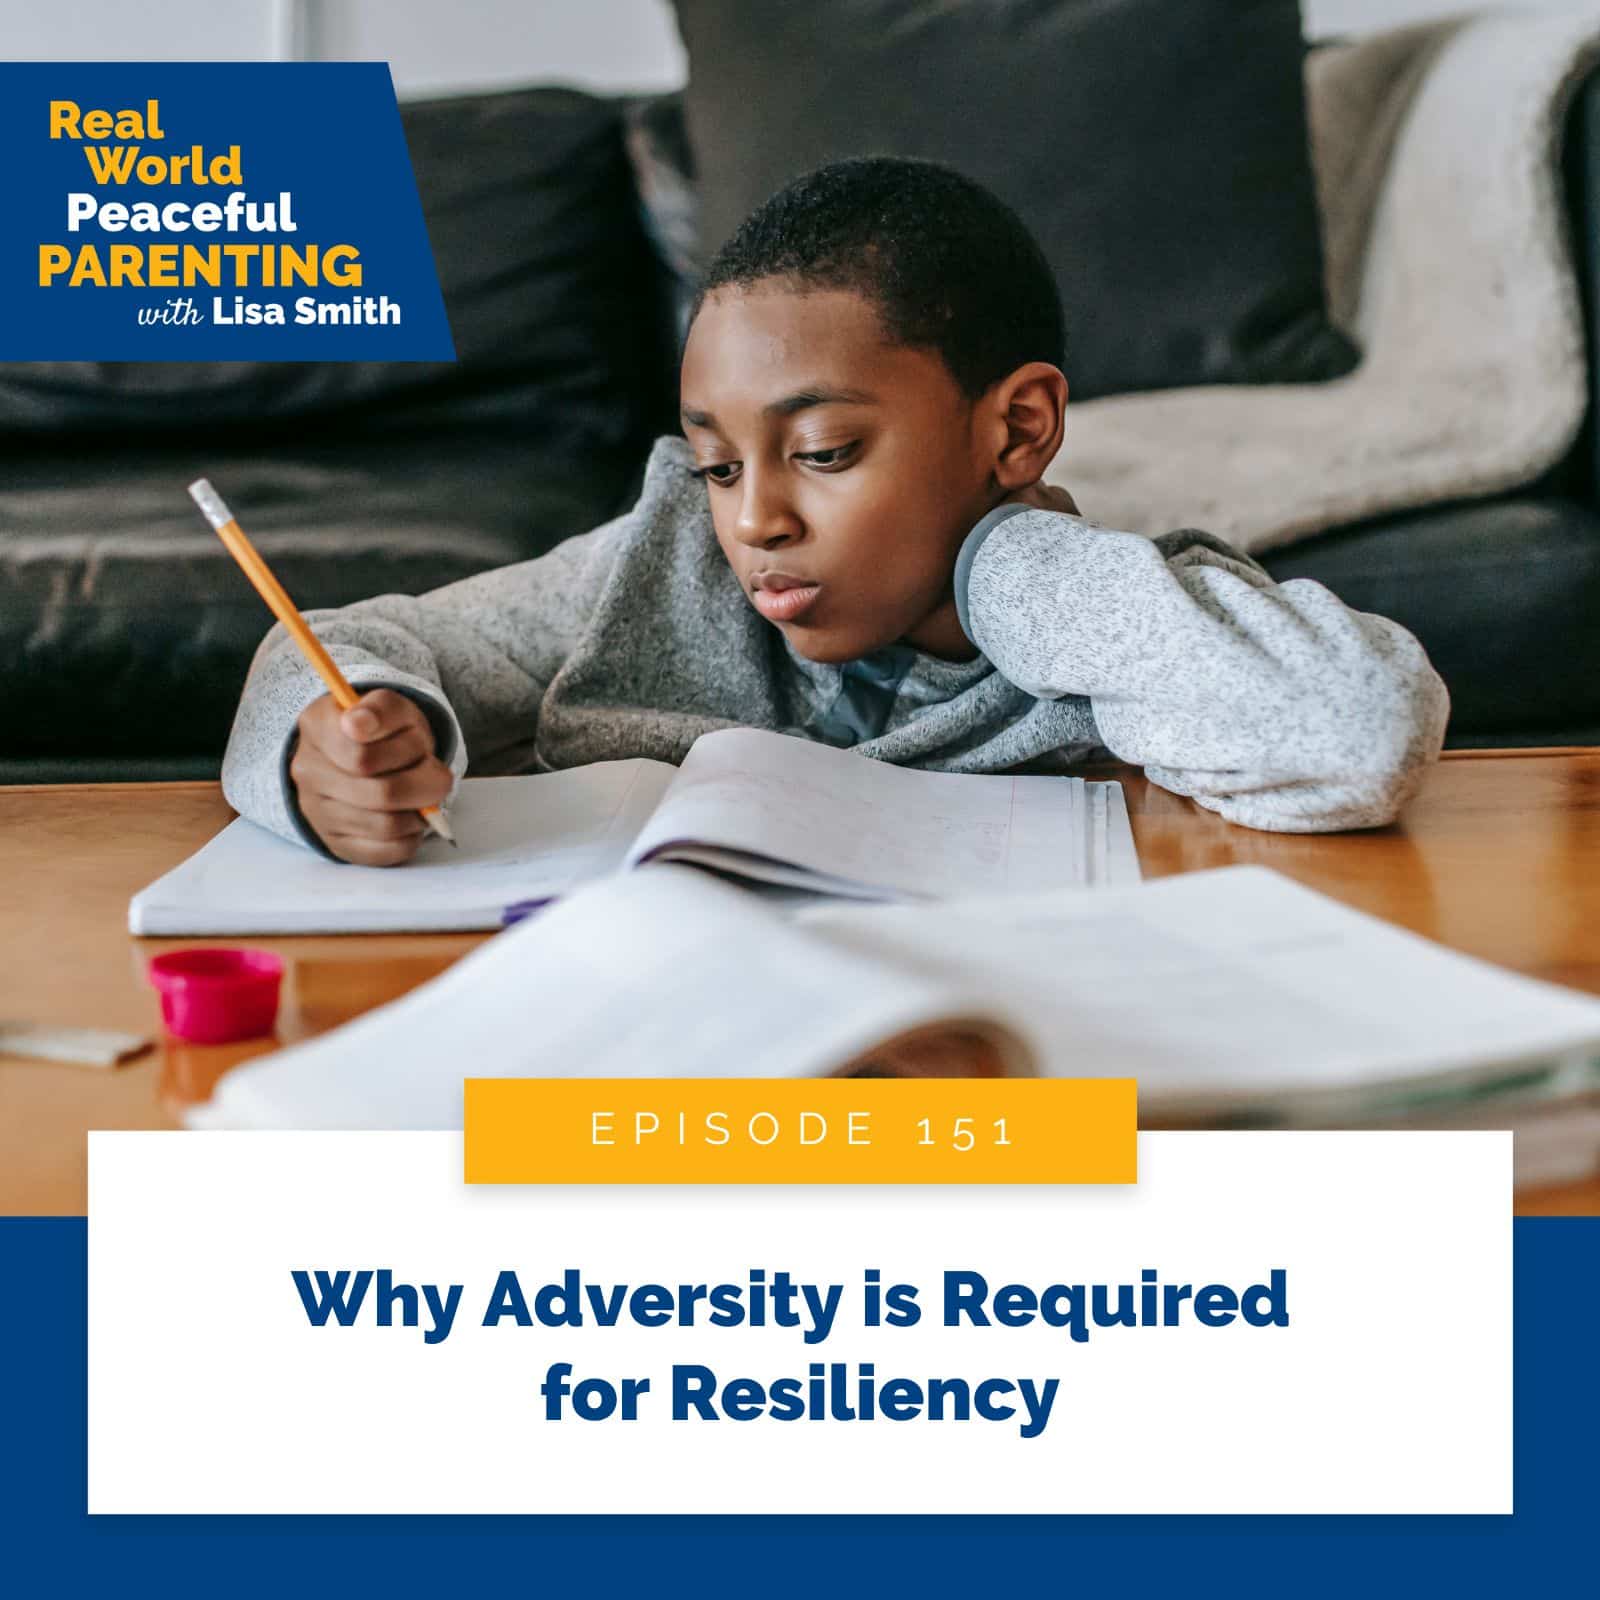 Real World Peaceful Parenting with Lisa Smith | Why Adversity is Required for Resiliency